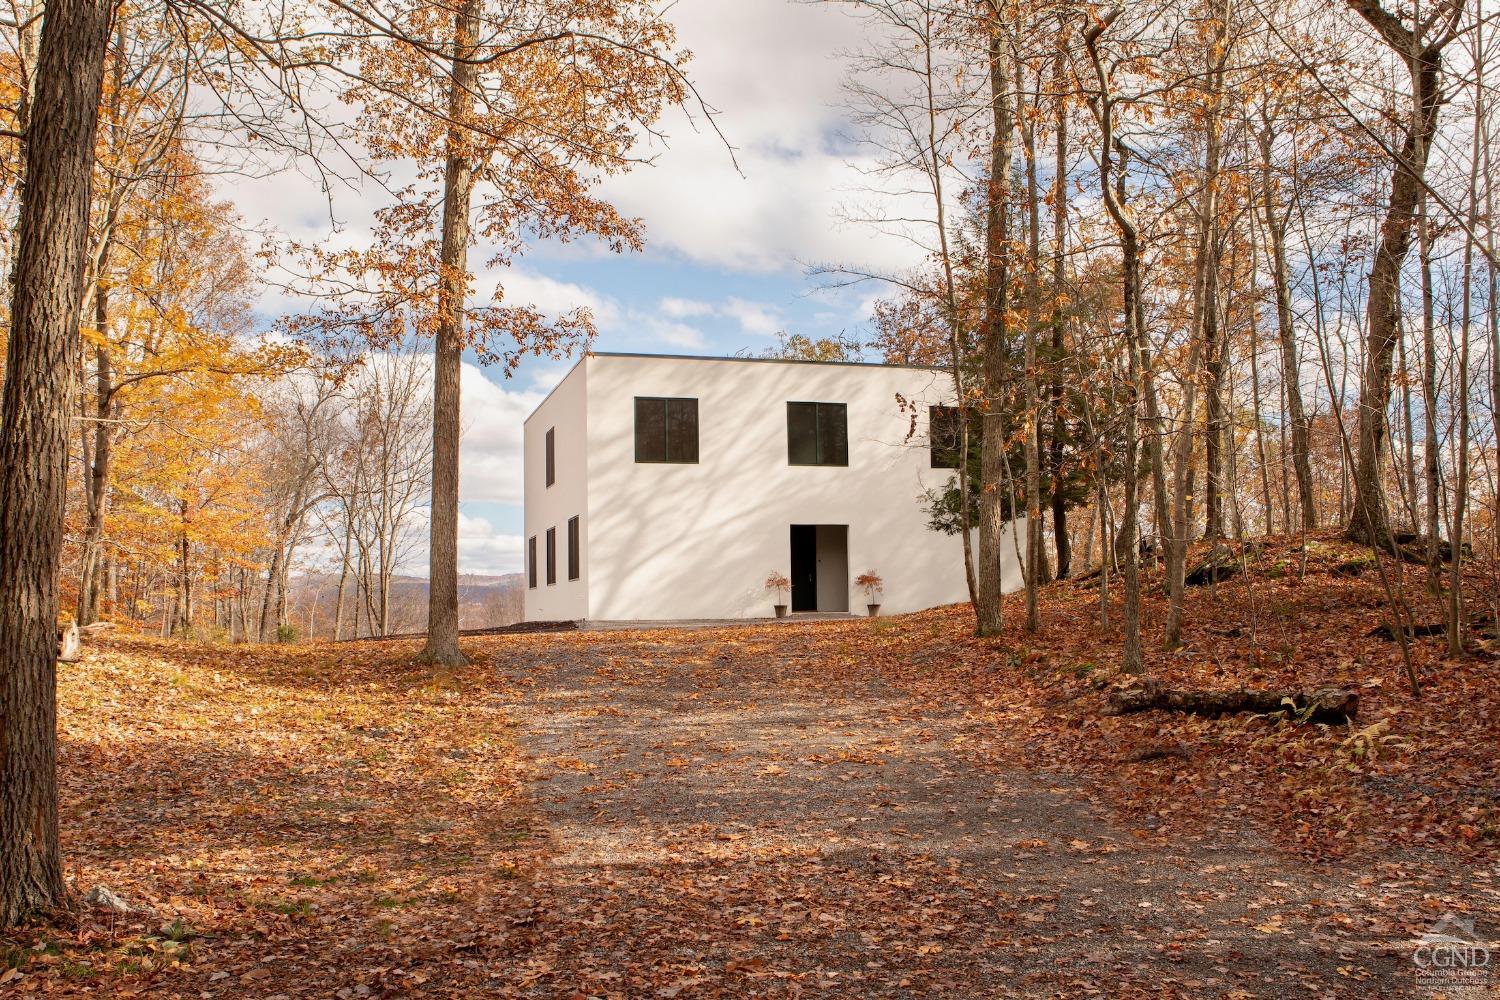 Property for Sale at 49 Sky Top Road, Copake, New York - Bedrooms: 4 
Bathrooms: 3 
Rooms: 13  - $2,875,000